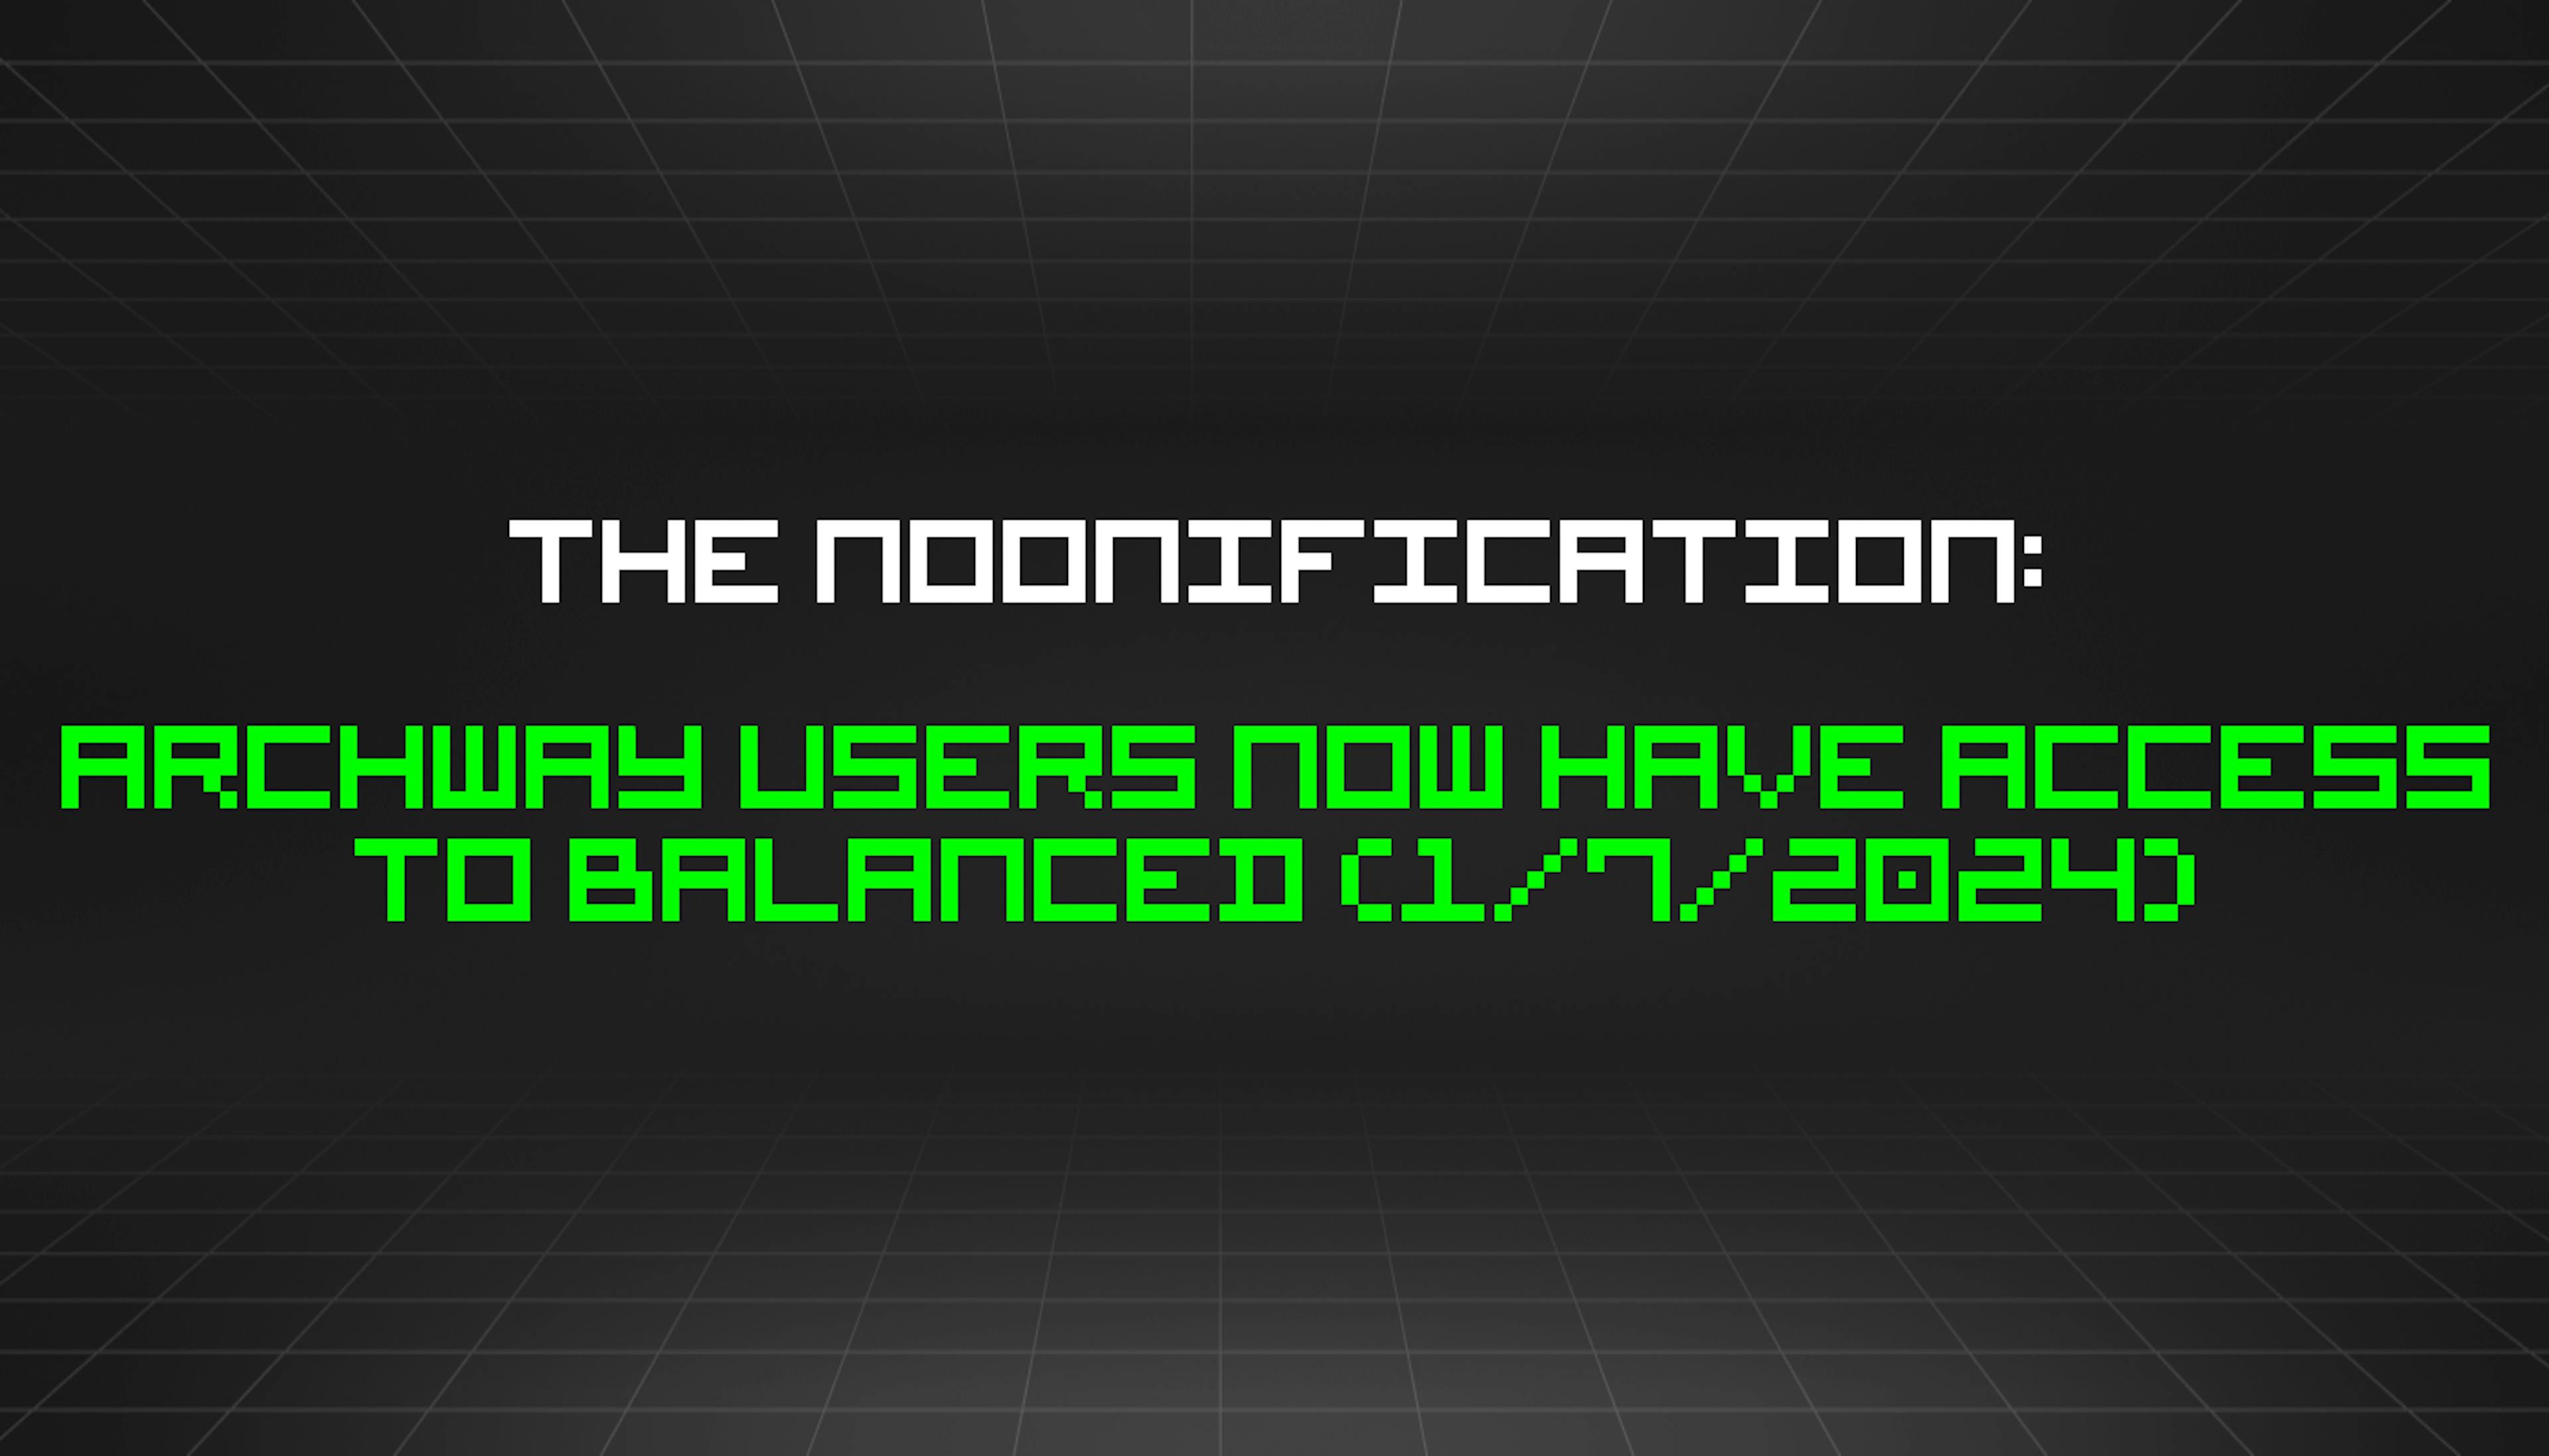 featured image - The Noonification: Archway Users Now Have Access to Balanced (1/7/2024)